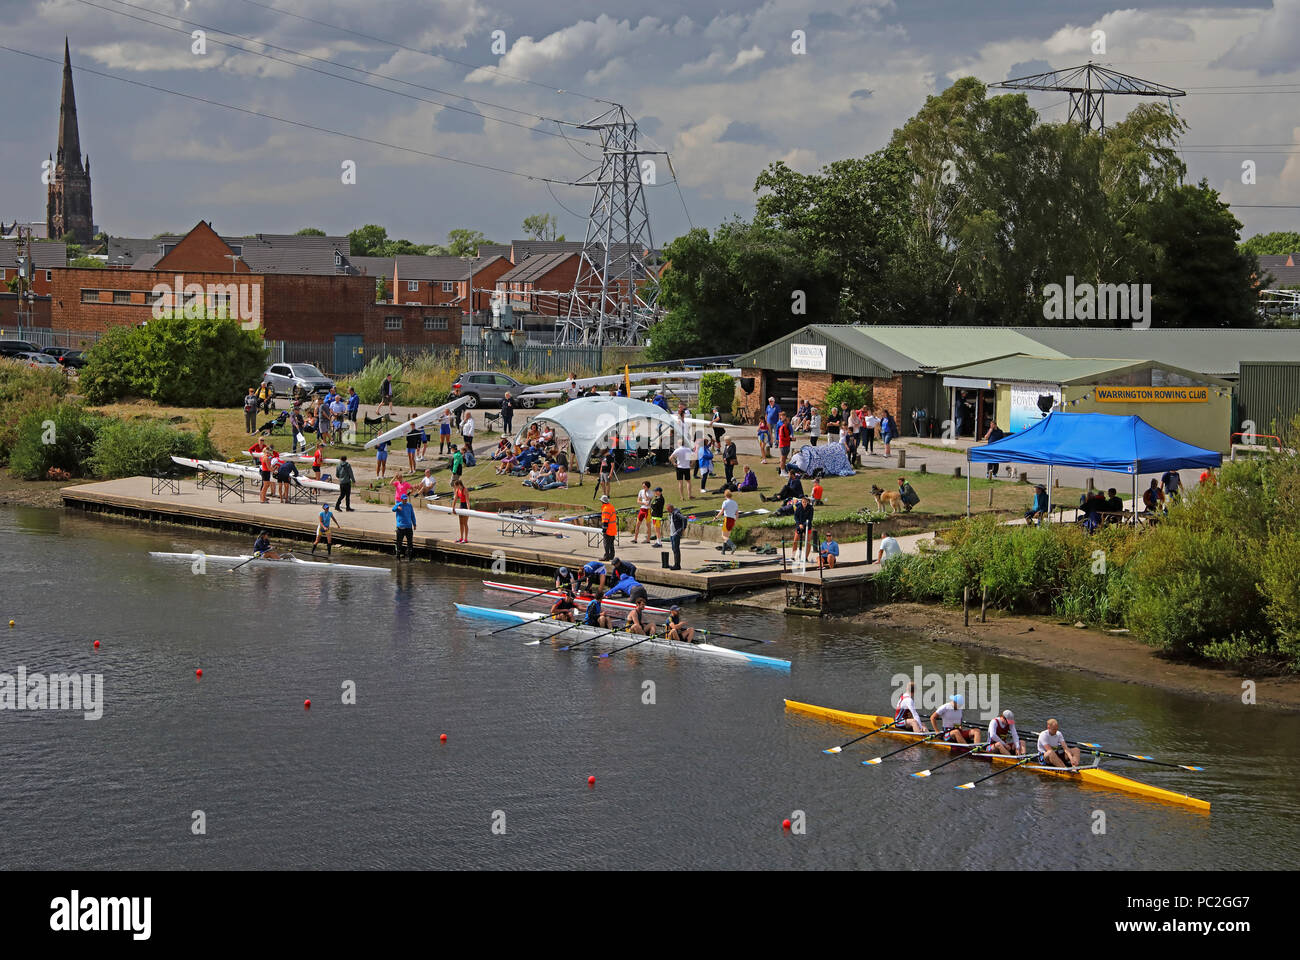 View from Kingsway Bridge, of Warrington Rowing Club 2018 Summer regatta, Howley lane, Mersey River, Cheshire, North West England, UK Stock Photo